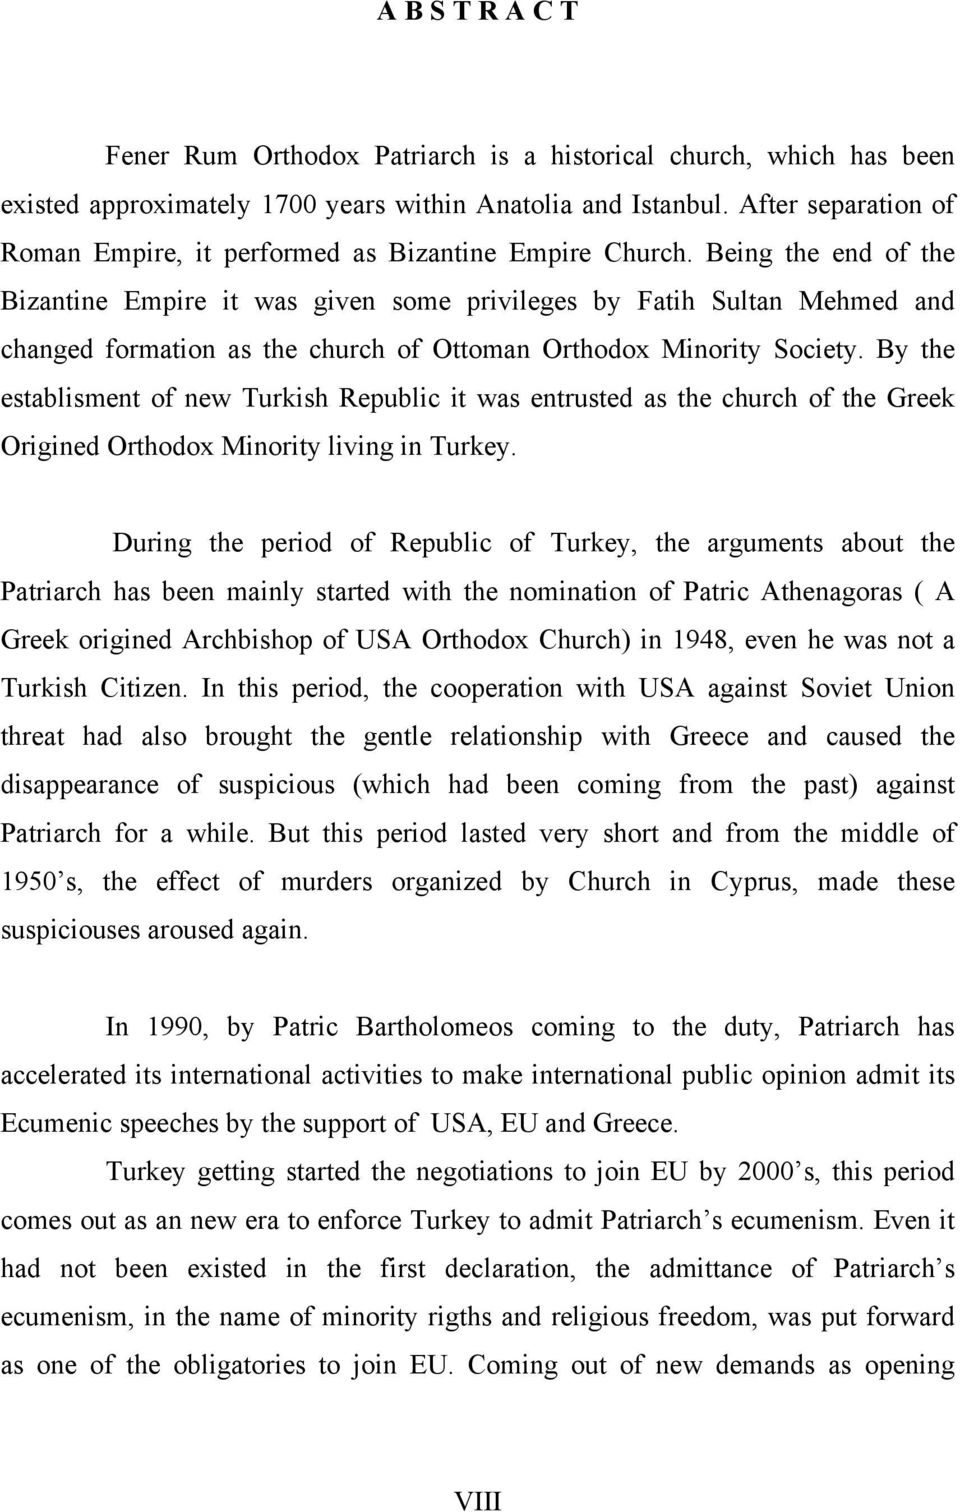 Being the end of the Bizantine Empire it was given some privileges by Fatih Sultan Mehmed and changed formation as the church of Ottoman Orthodox Minority Society.